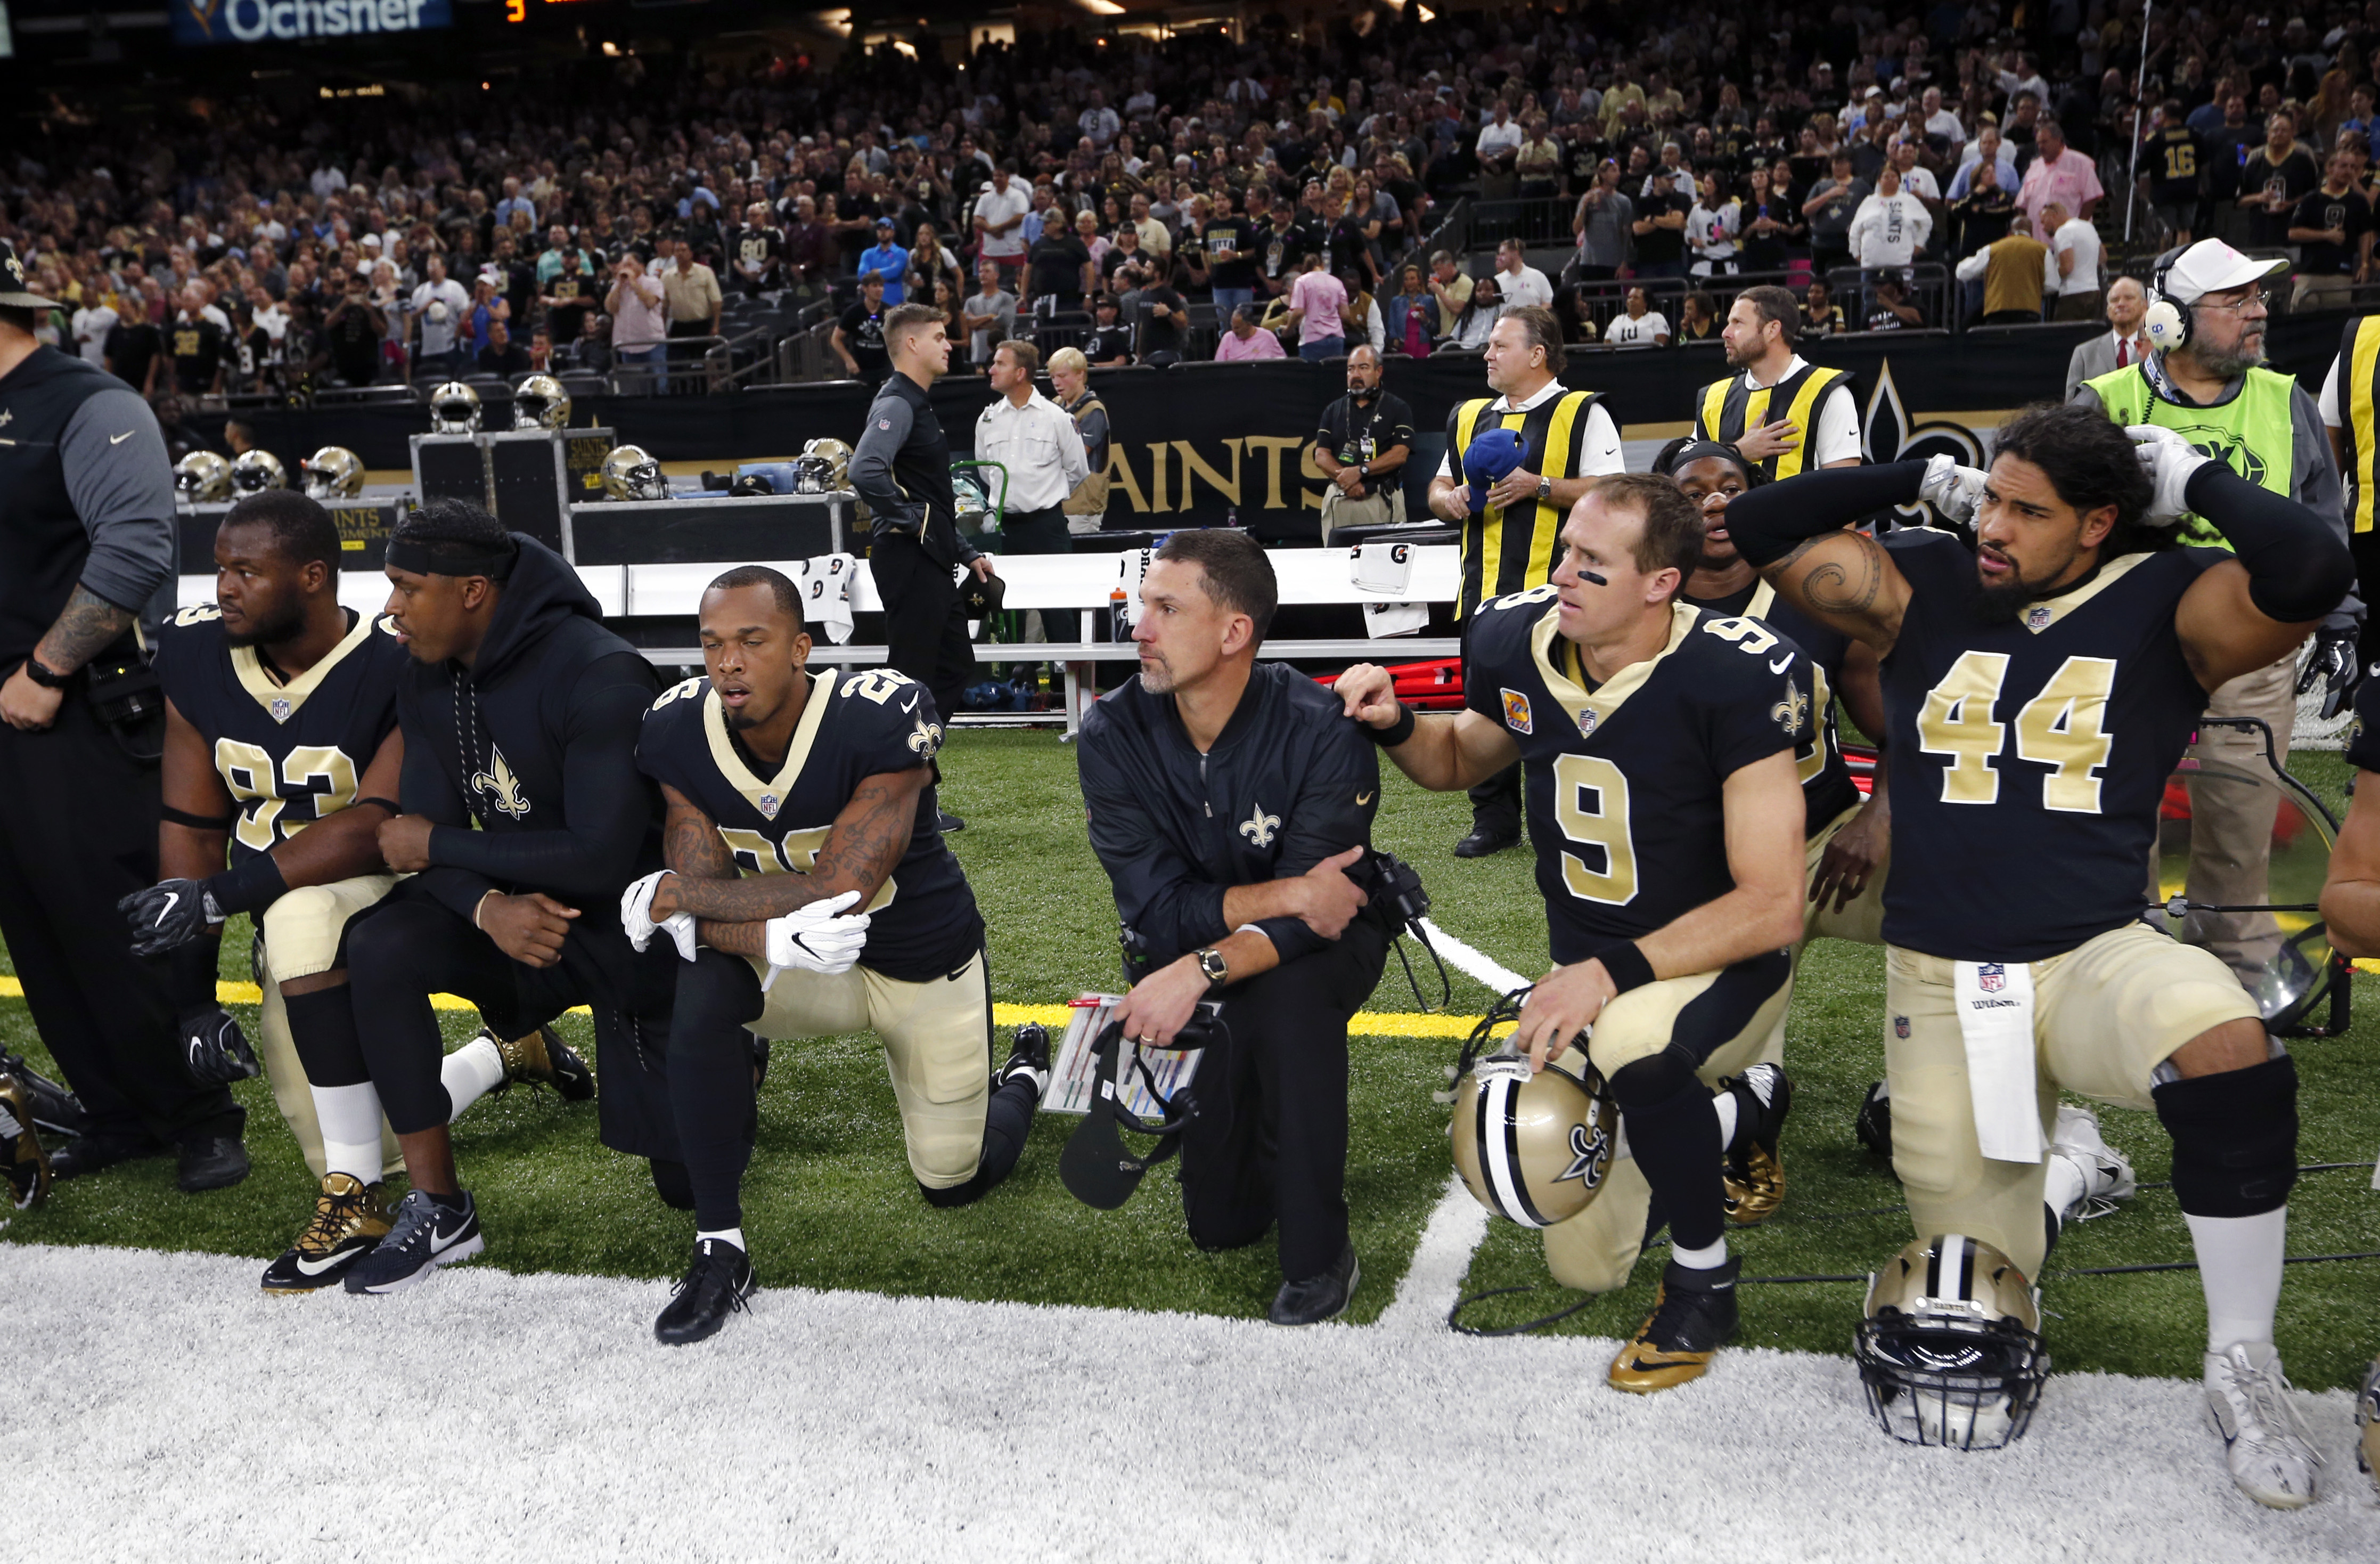 Nfl Seeks To Prevent Take A Knee Protests At Fall Meeting As Ratings Drop Washington Times